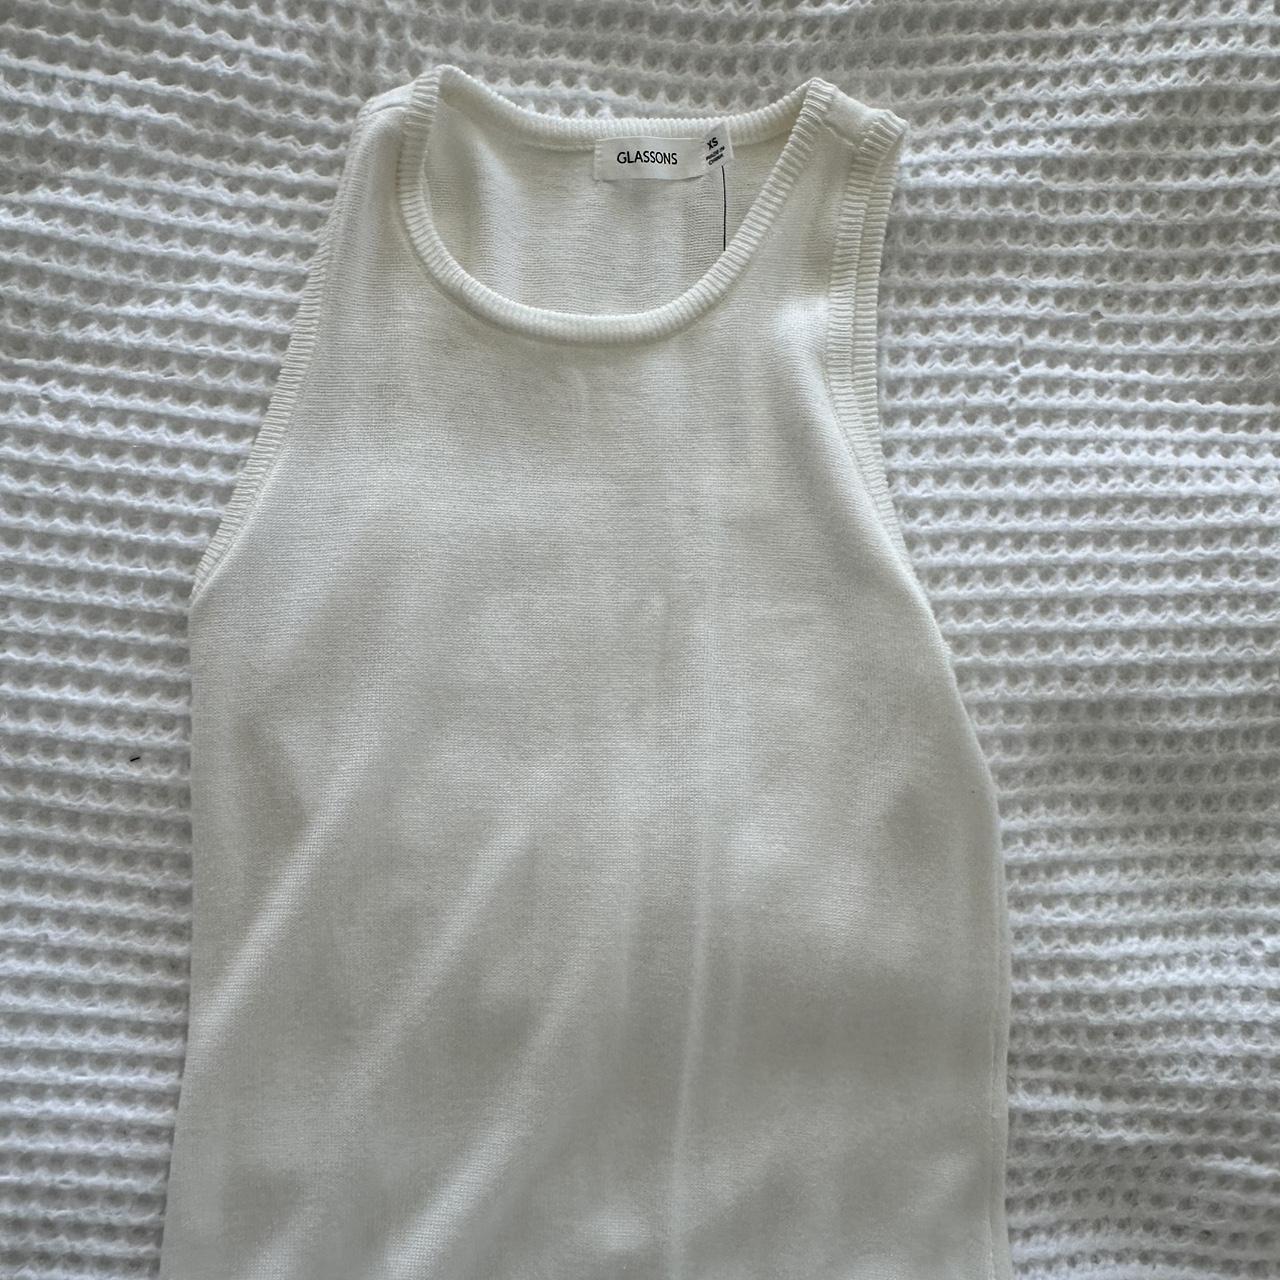 WHITE KNIT GLASSONS DRESS Perfect for summer Never... - Depop